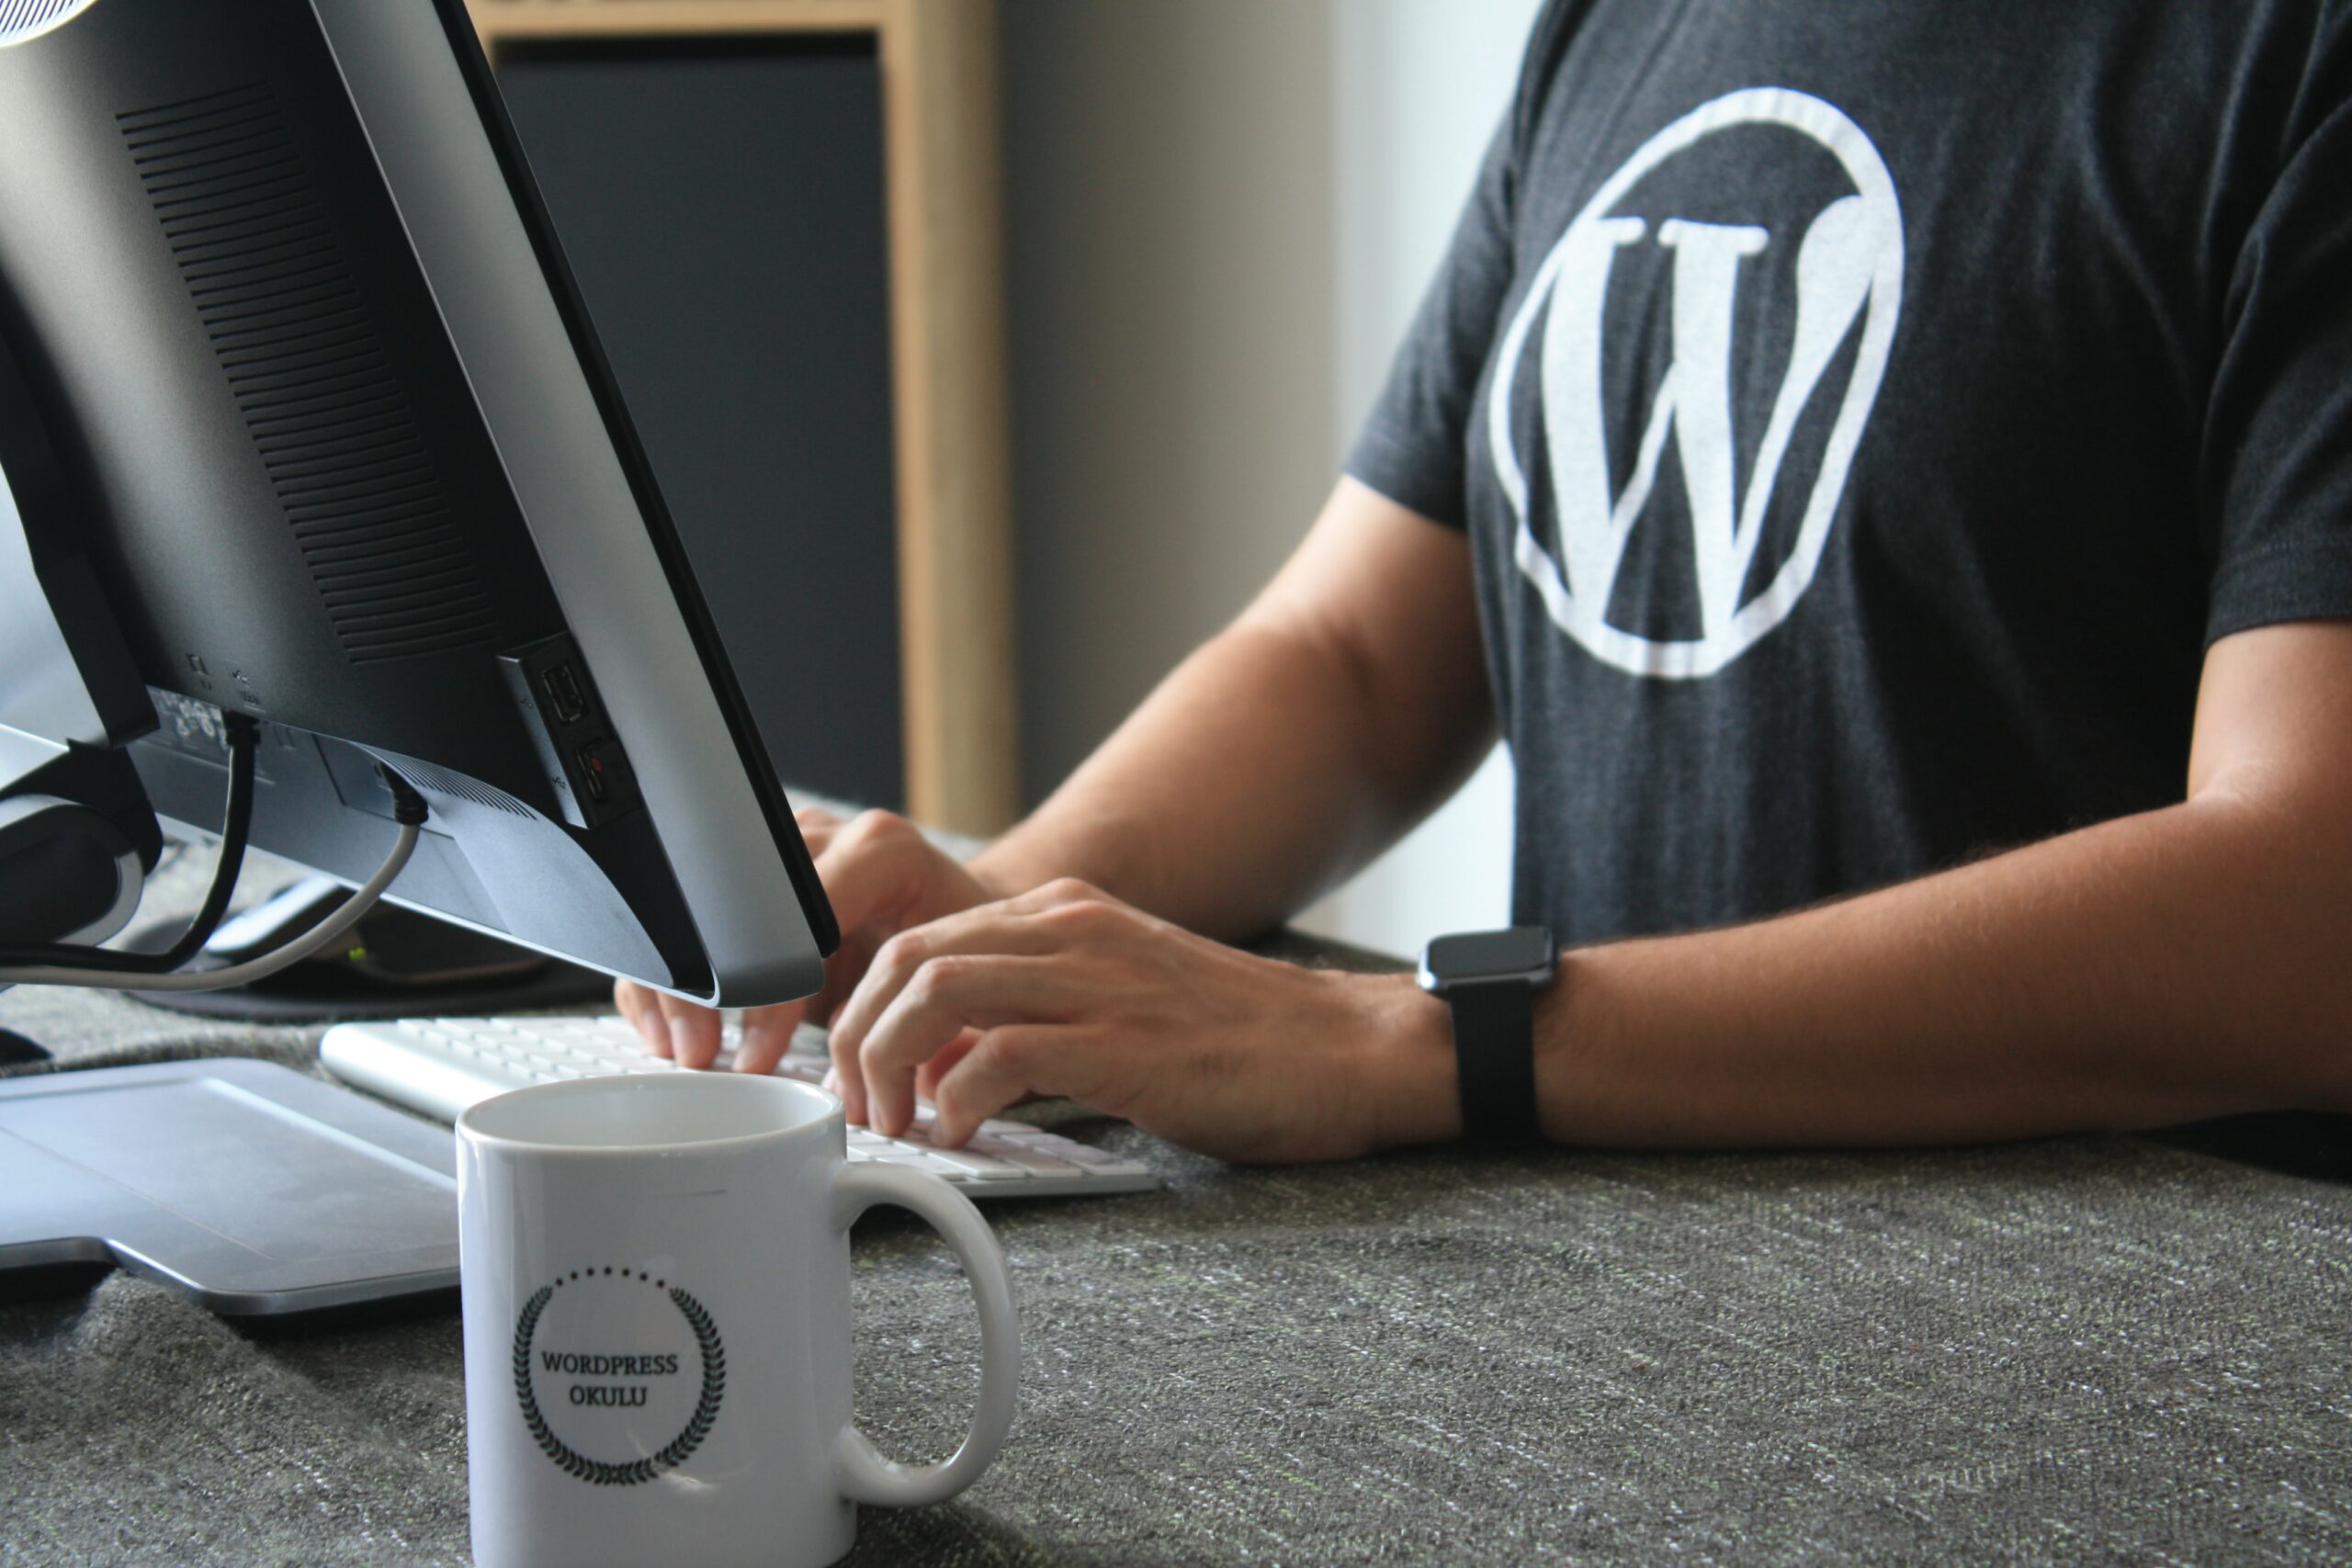 How to scan a WordPress site for vulnerabilities